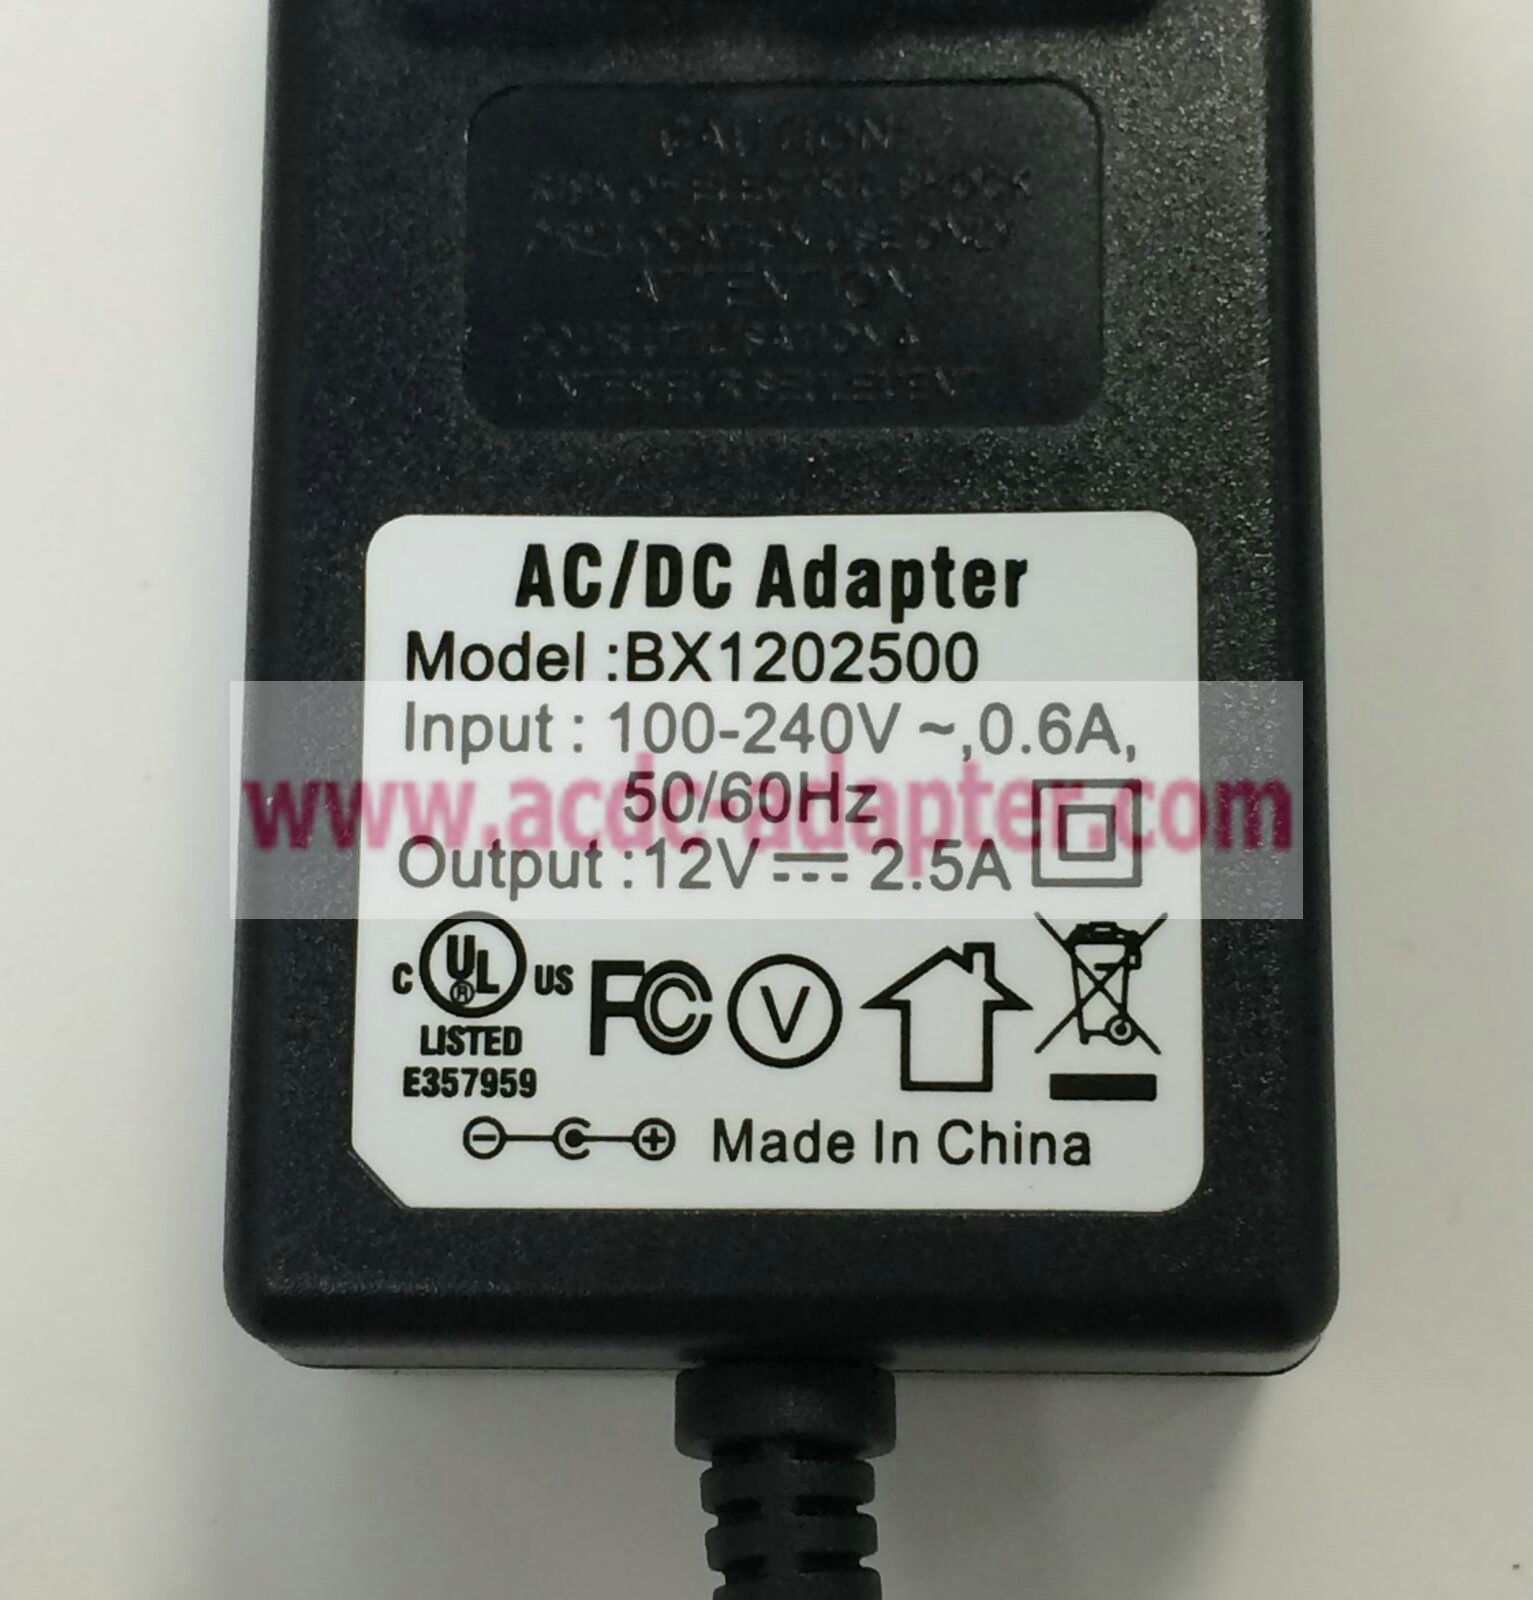 Brand new 12V 2.5A AC/DC Adapter For Lorex BX1202500 DVR Security System - Click Image to Close